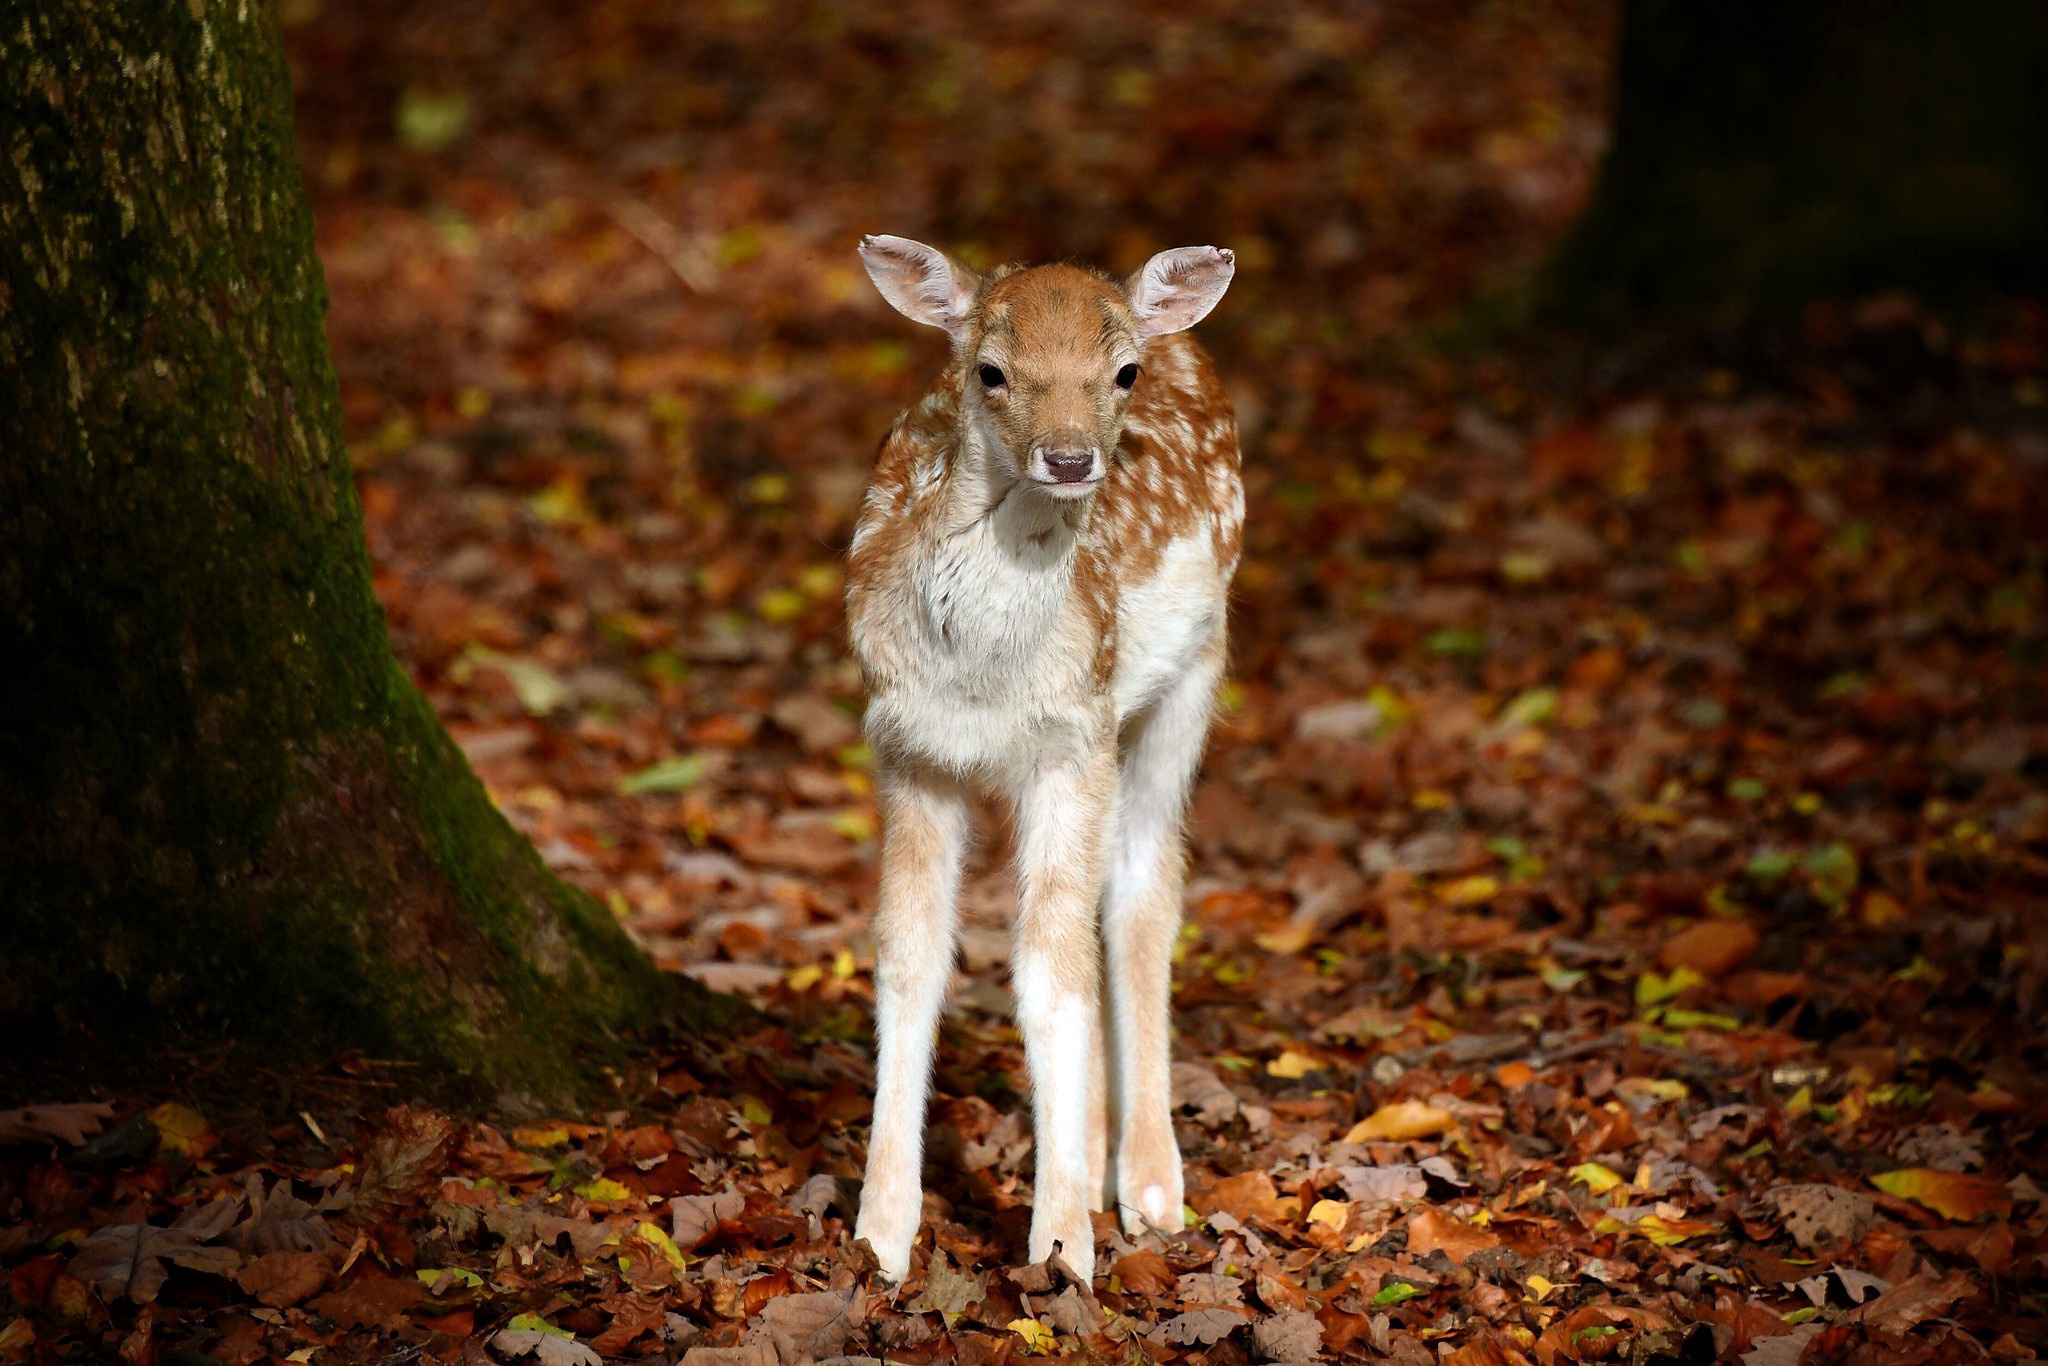 General 2048x1366 fall leaves deer animals baby animals mammals